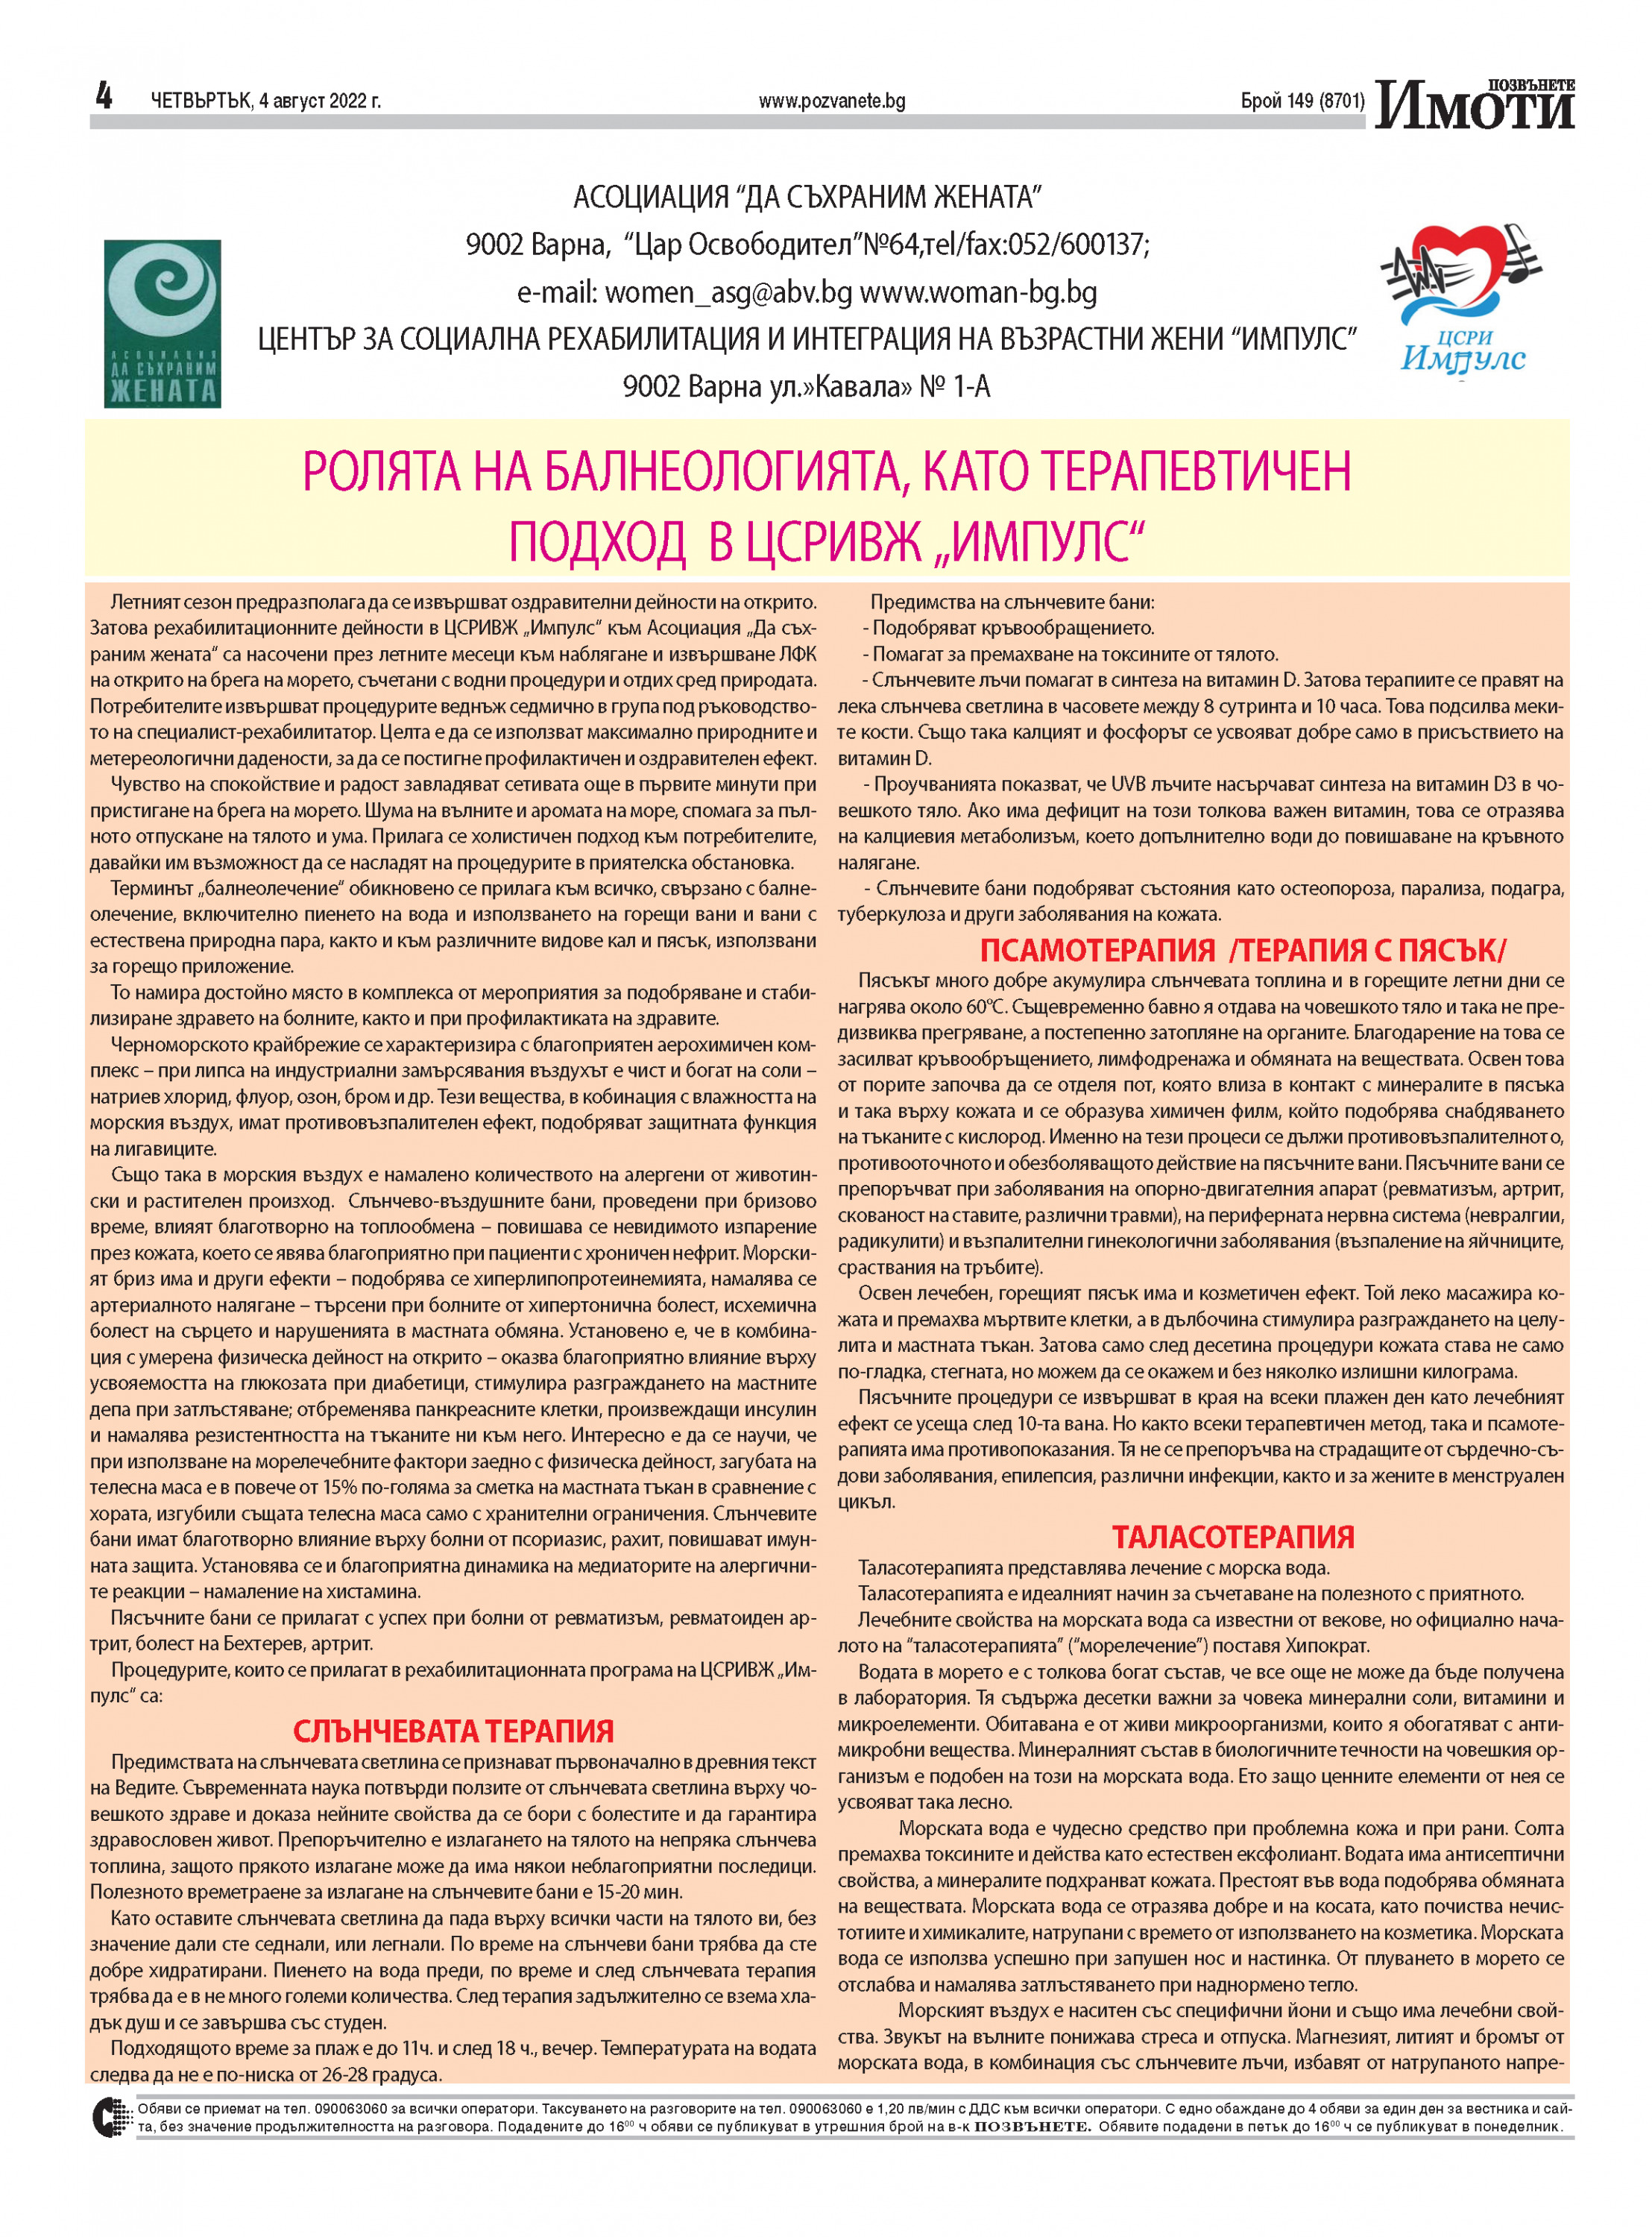 Pages-from-pozvanete-varna-2022-08-04.pdf Page 1